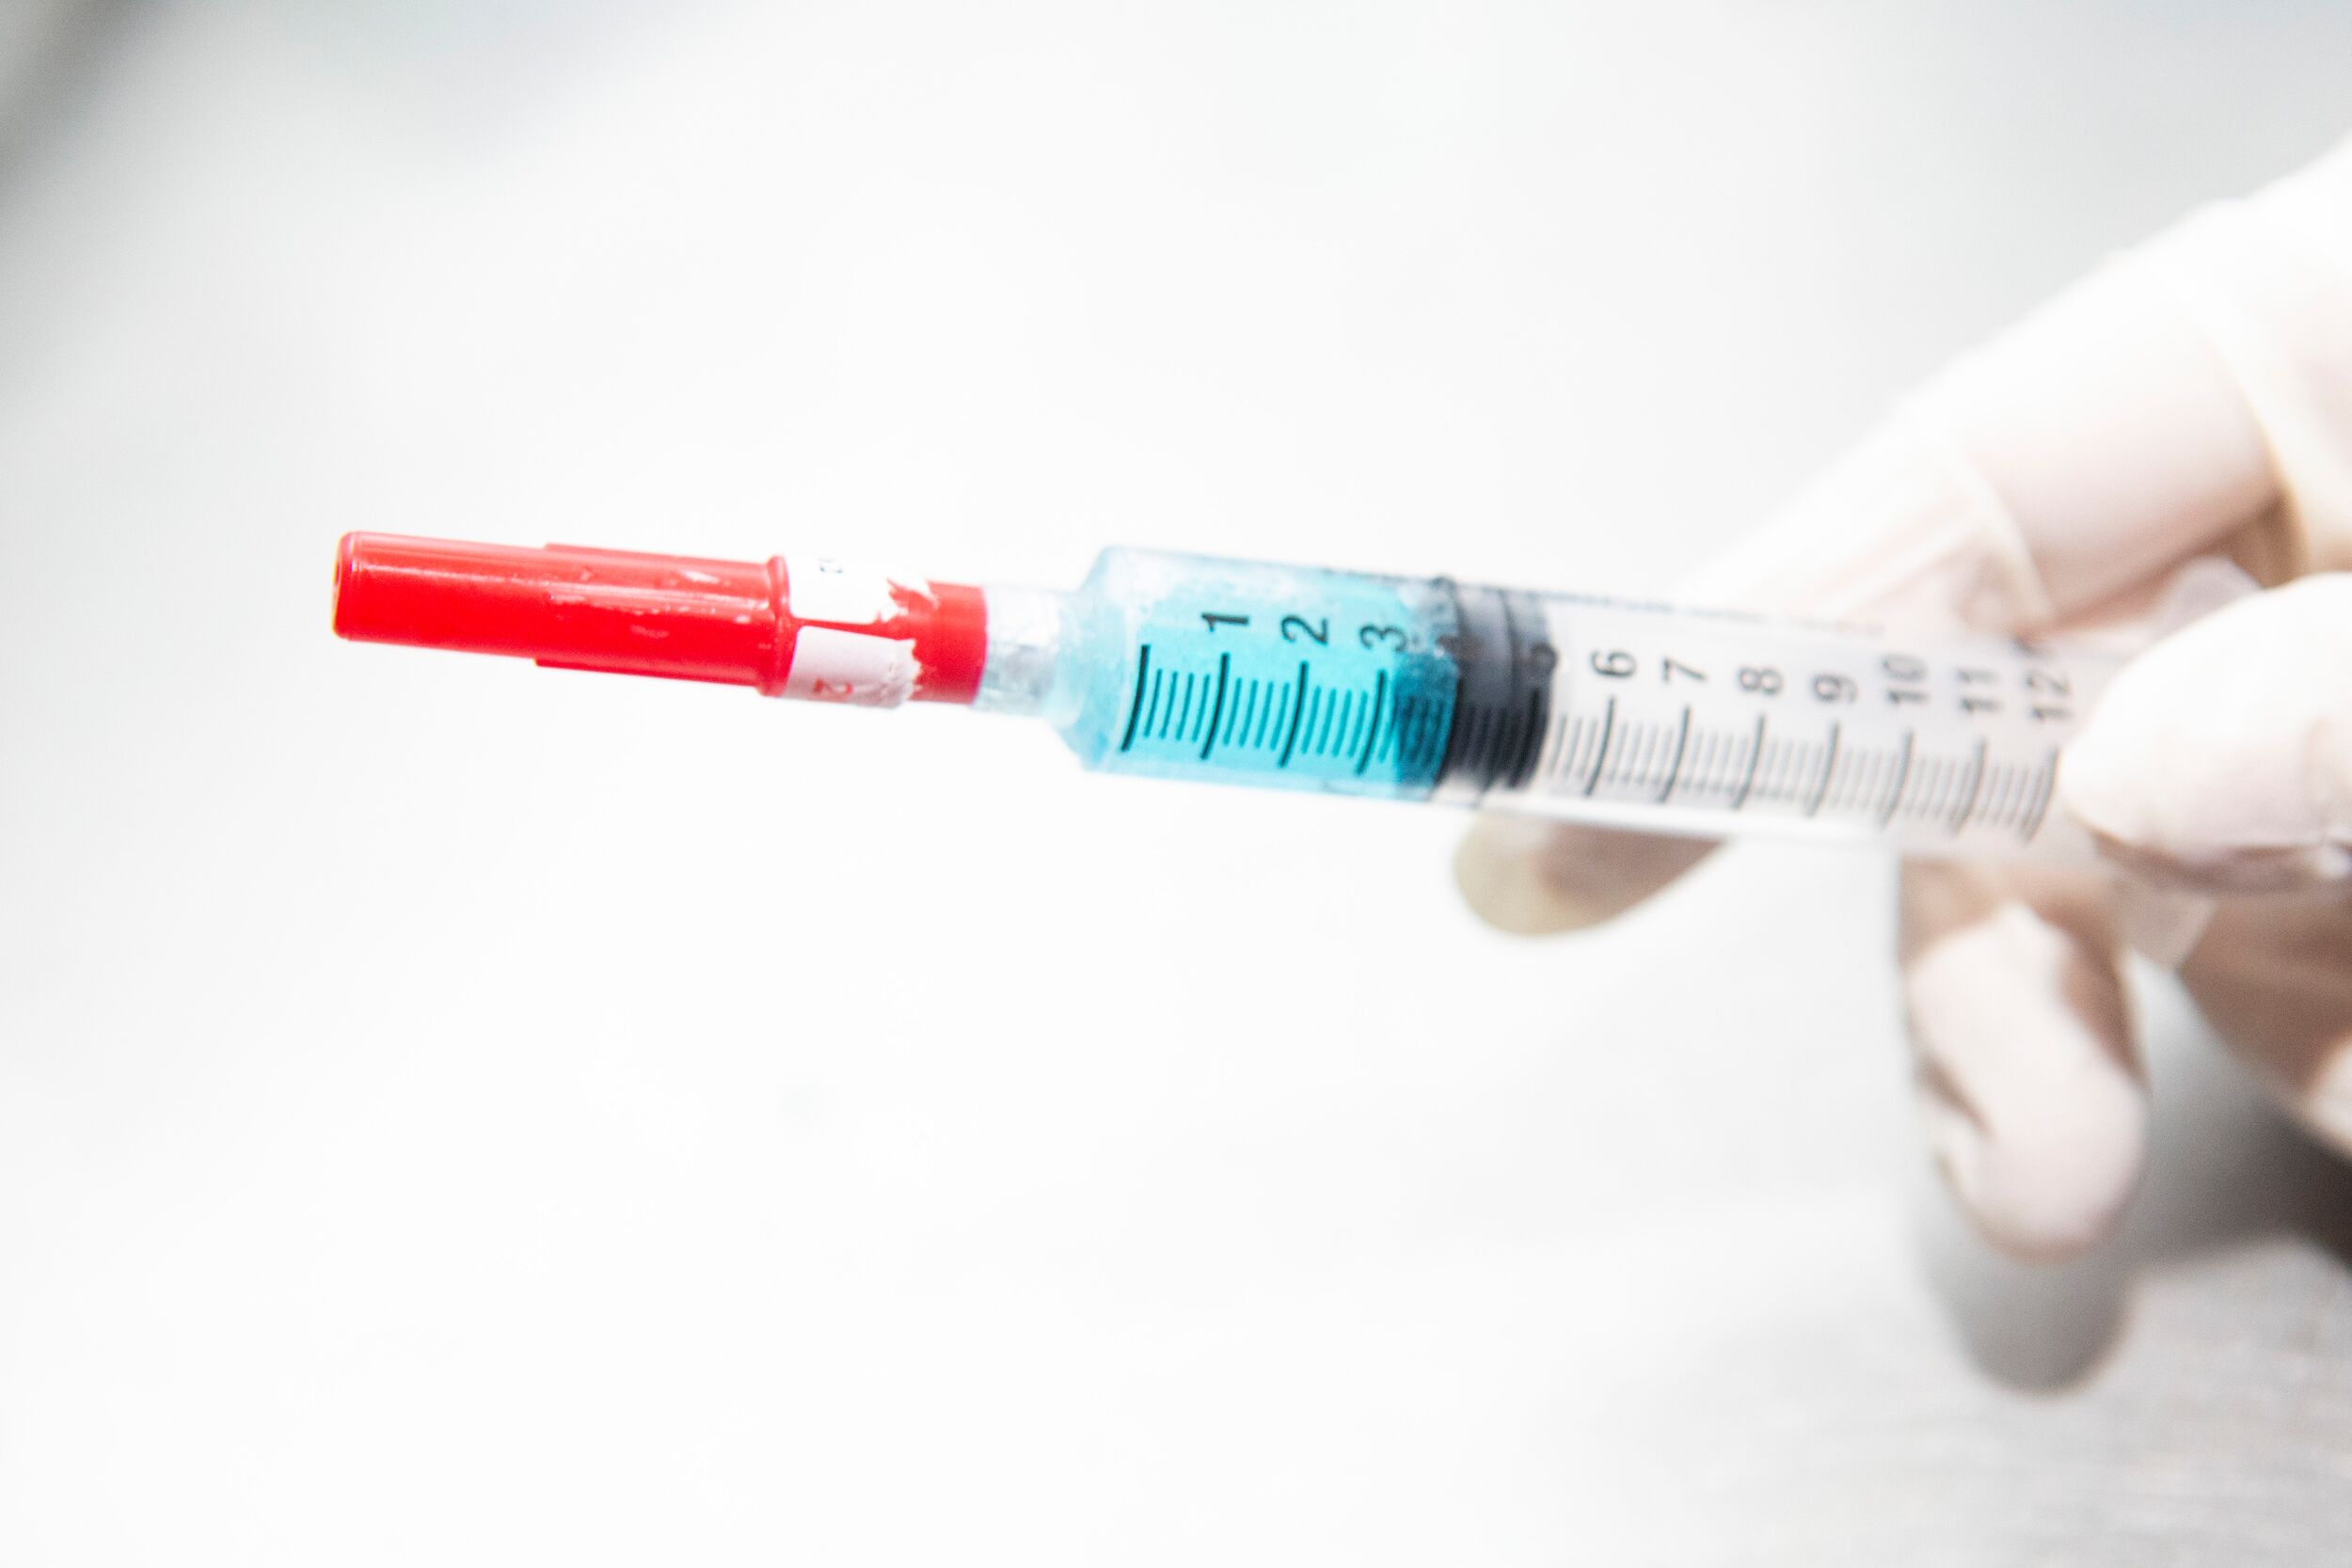 A photo of a vaccine syringe